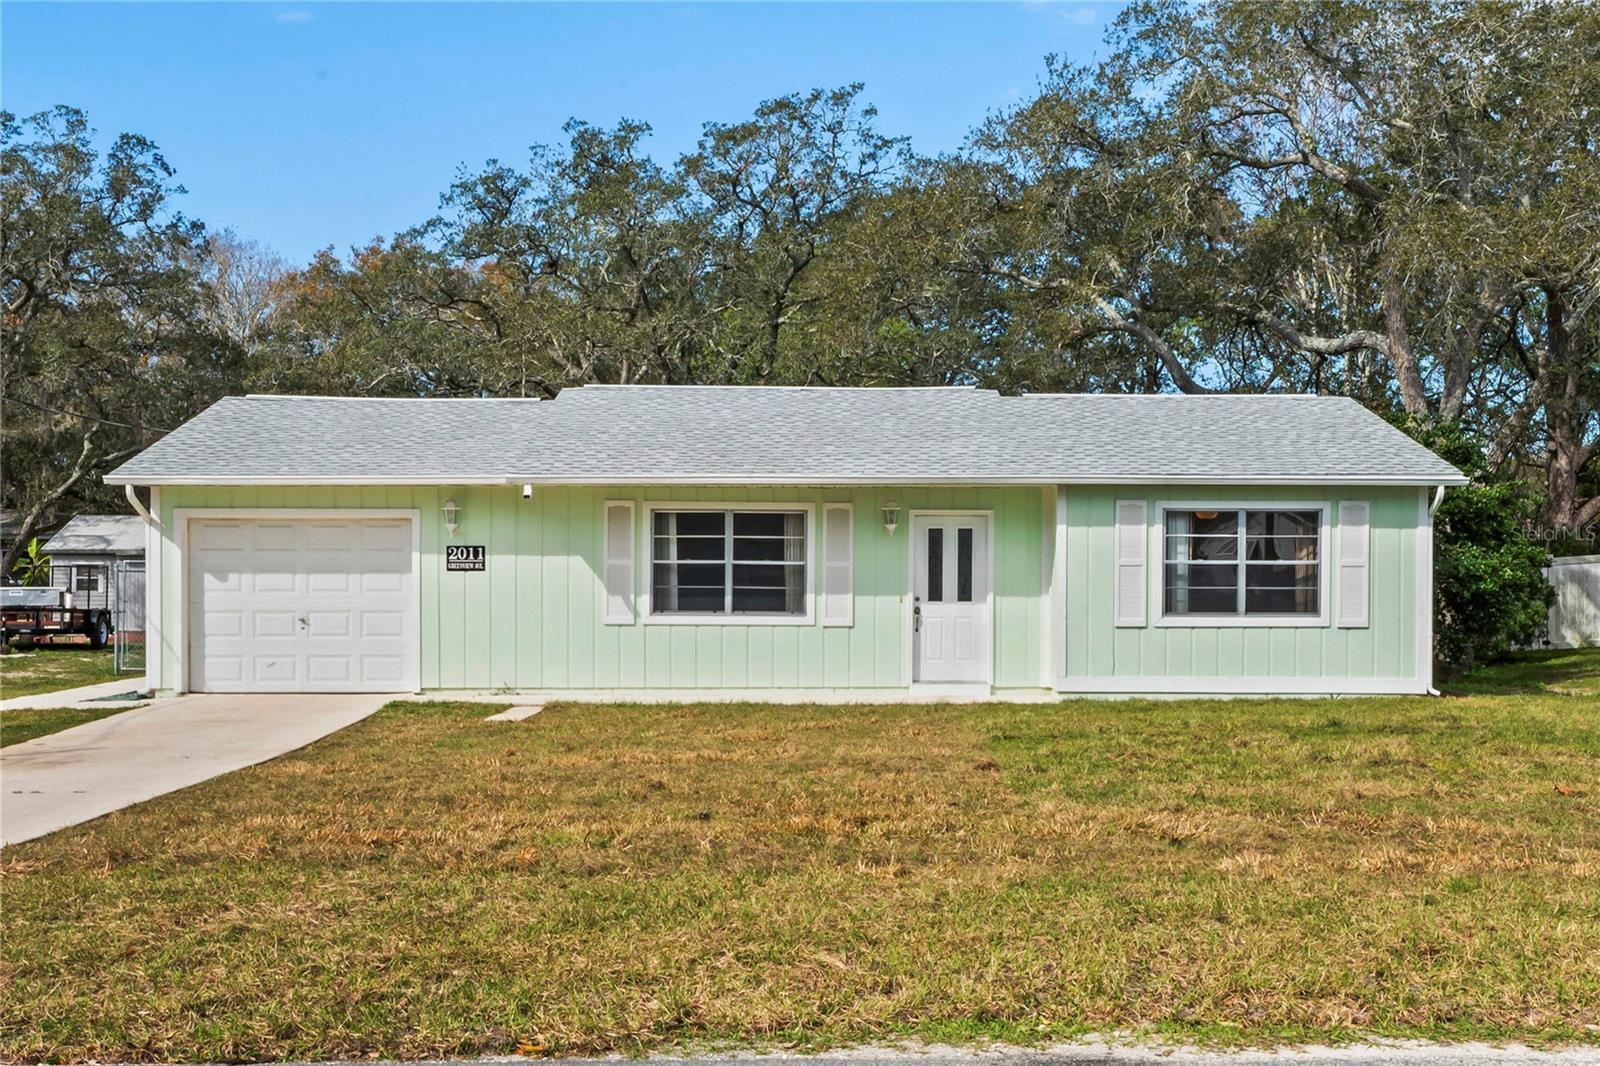 Photo one of 2011 Greenview Ave Spring Hill FL 34606 | MLS W7862254